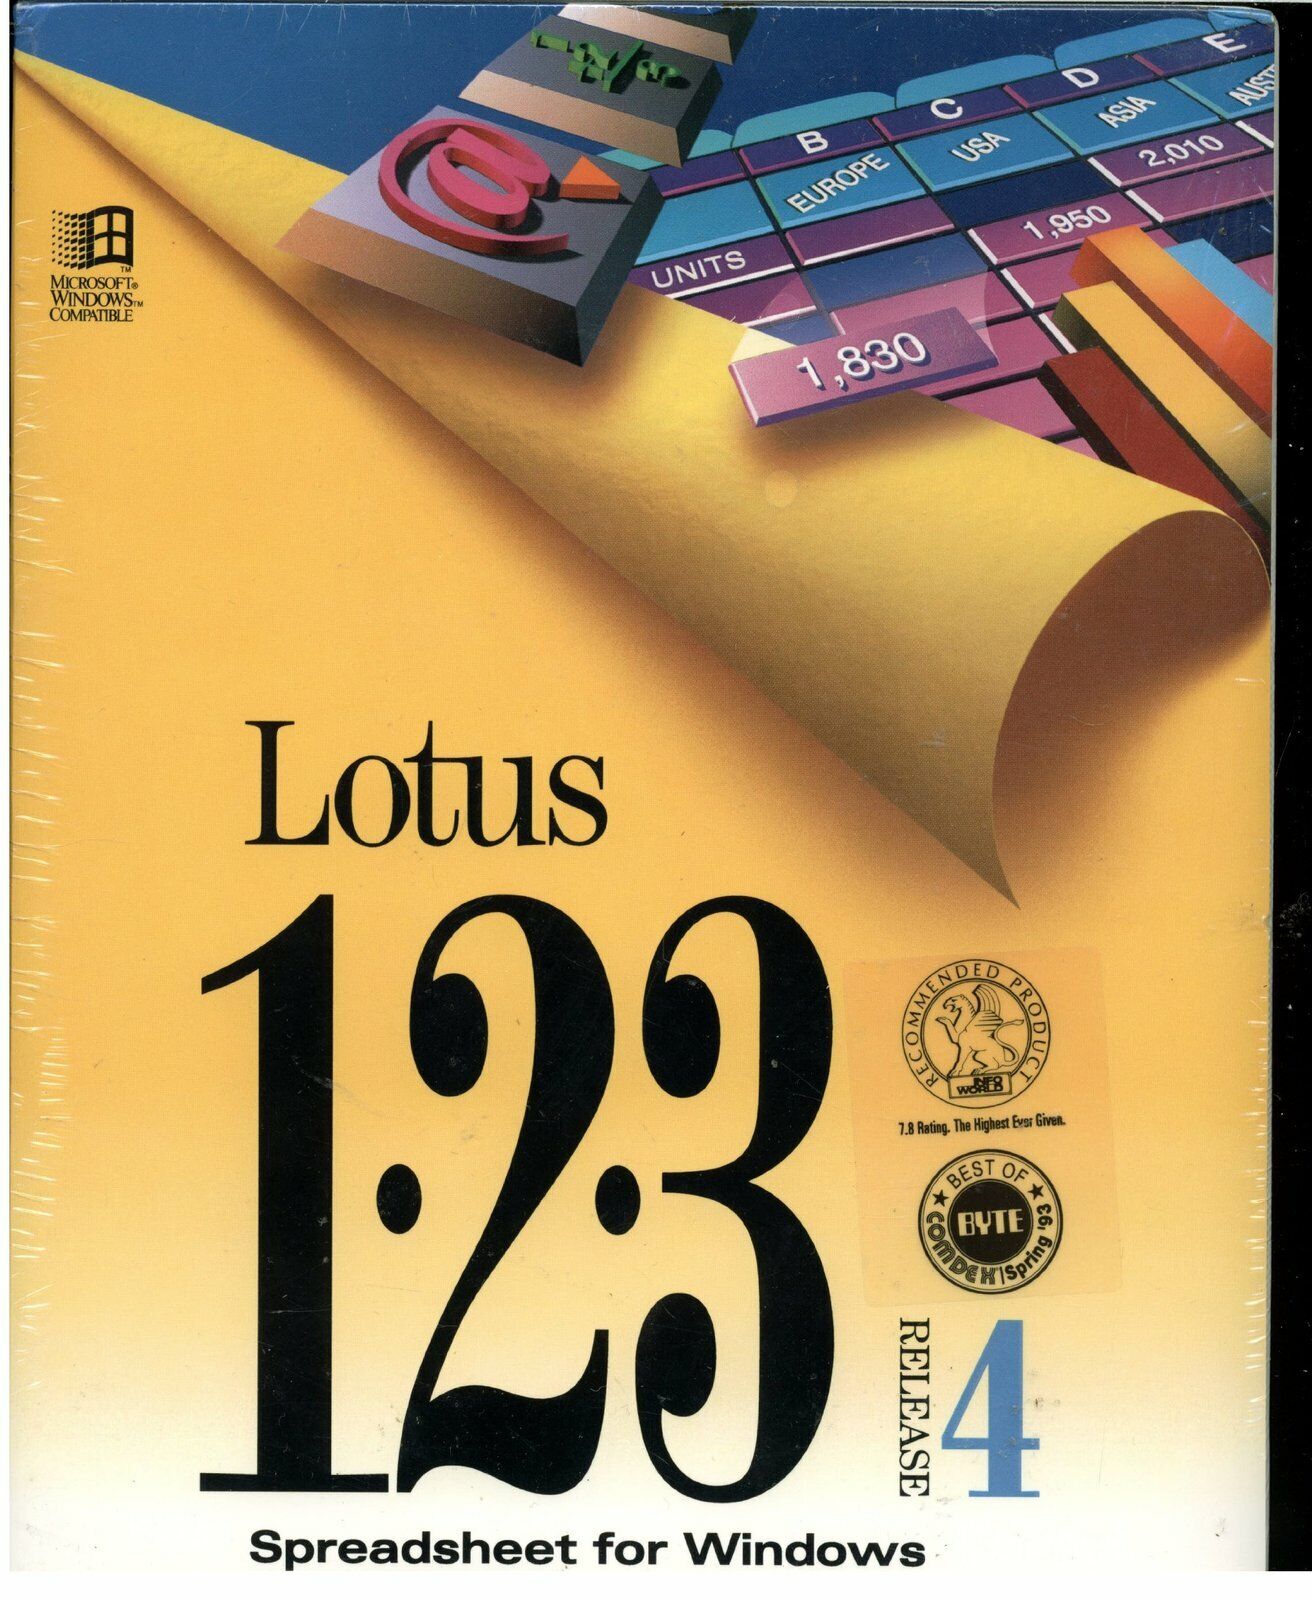 Lotus 123 Spreadsheet for Windows Release 5 (3.5 Inch discs only) No box